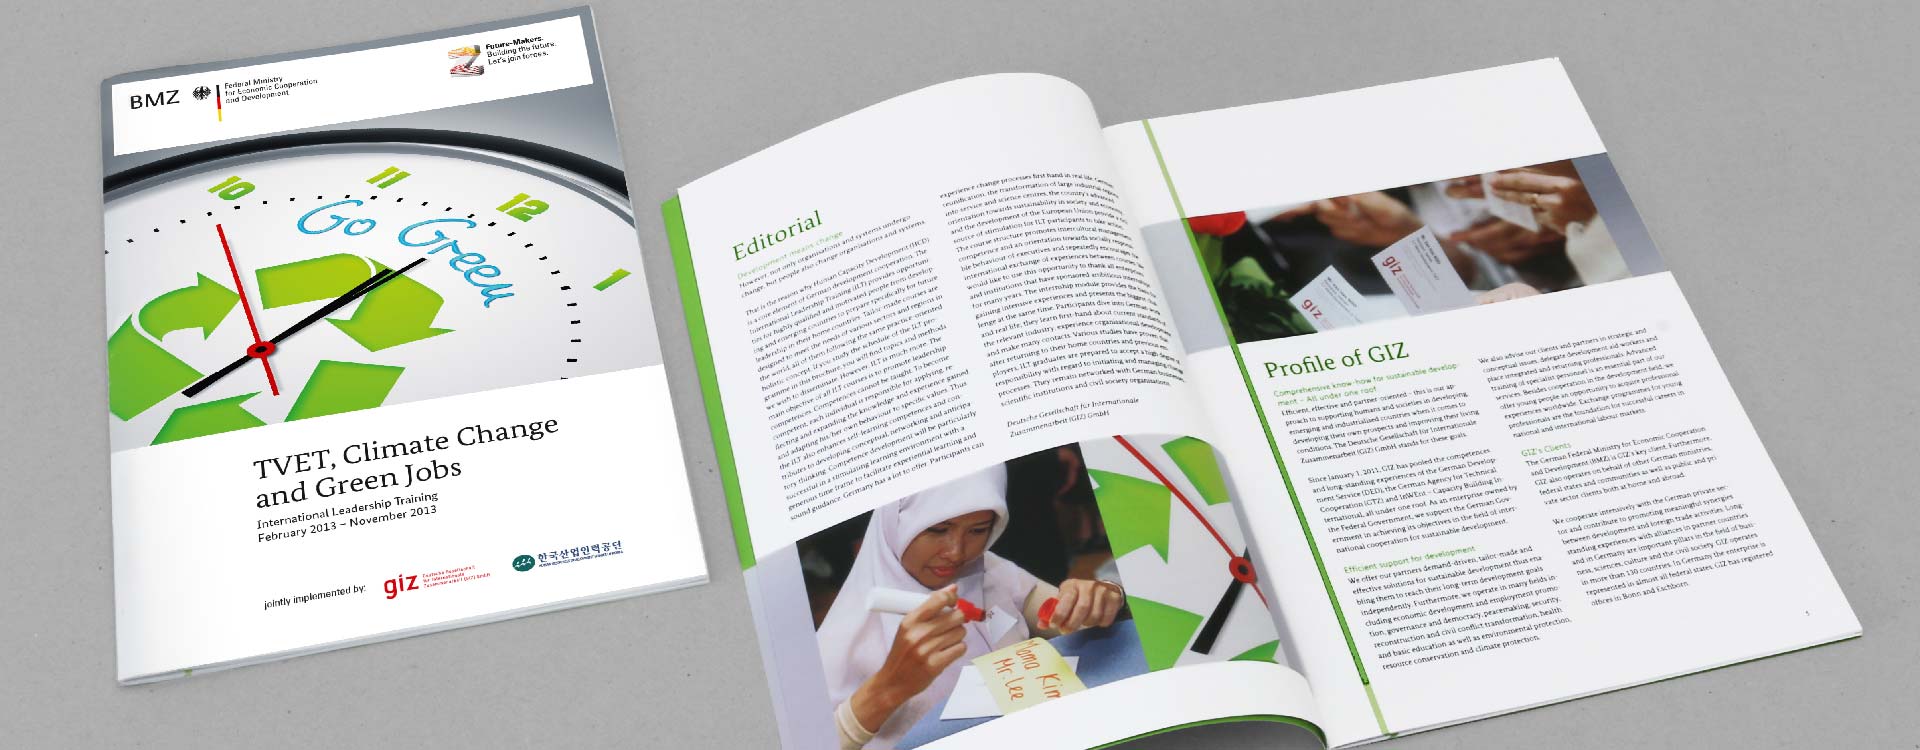 Front cover and inside pages of the brochure Technical Vocational Education and Training, Climate Change and Green Jobs of the GIZ Magdeburg; Design: Kattrin Richter | Graphic Design Studio